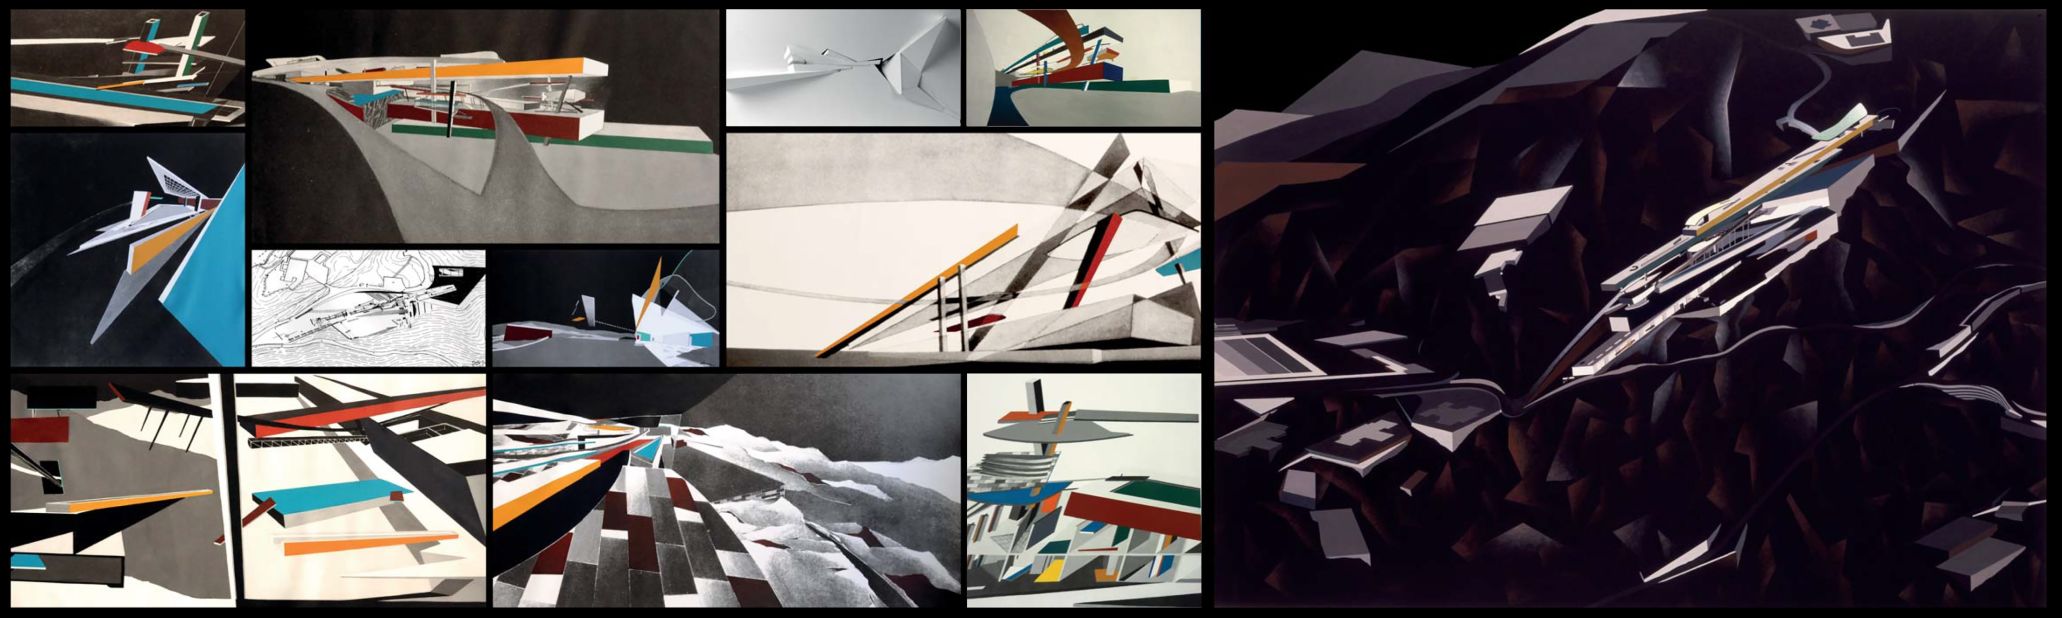 Zaha Hadid: Peak Proposal (1982/1983), Set of 12 works (1 painting on paper; 9 printed and acrylic painted canvases; 1 set of overlaid plans; 1 paper relief.